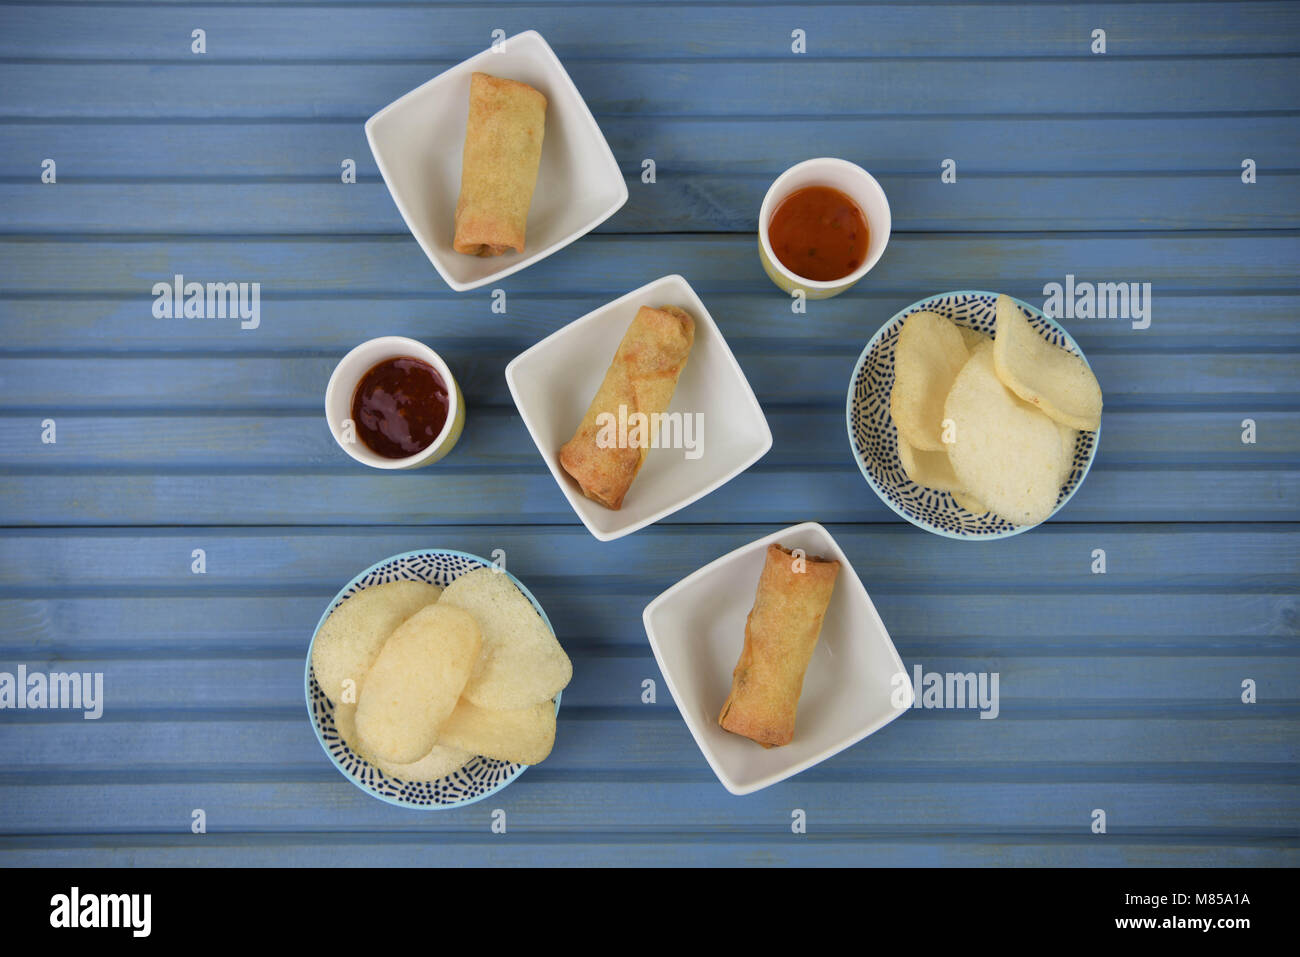 flat lay table of food of prawn crackers and spring rolls with dipping sauce Stock Photo